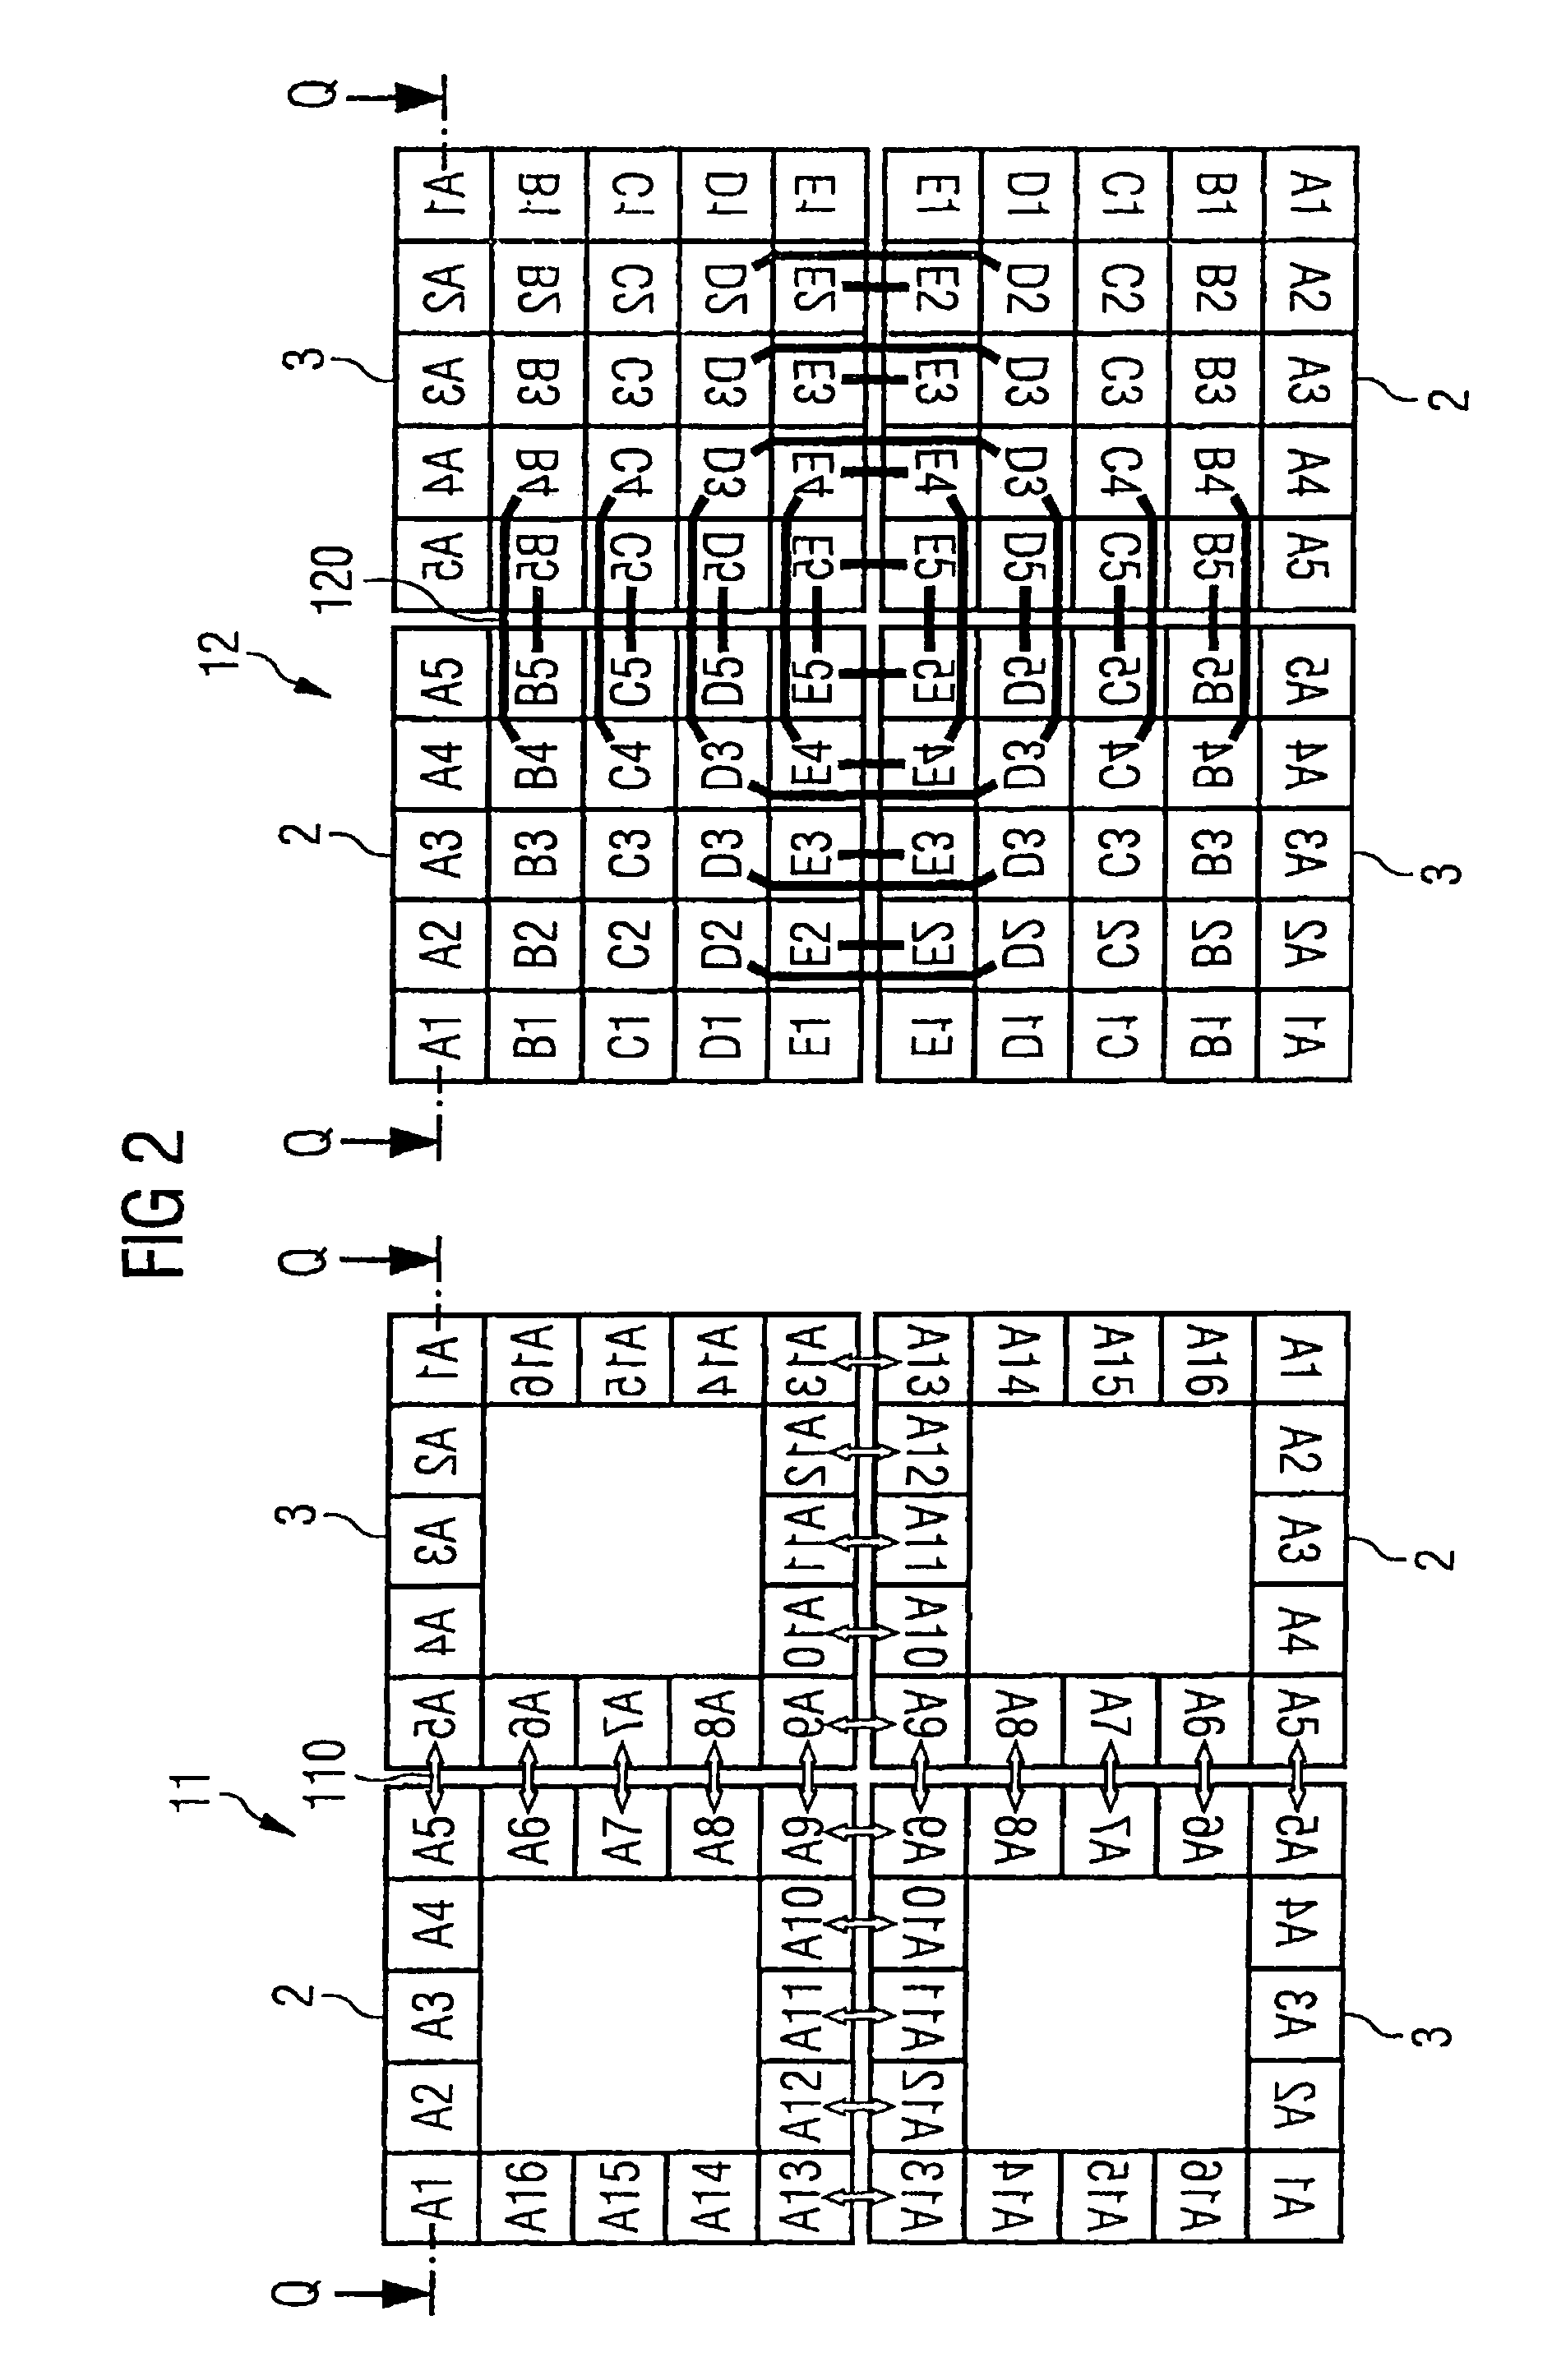 Multichip module including a plurality of semiconductor chips, and printed circuit board including a plurality of components